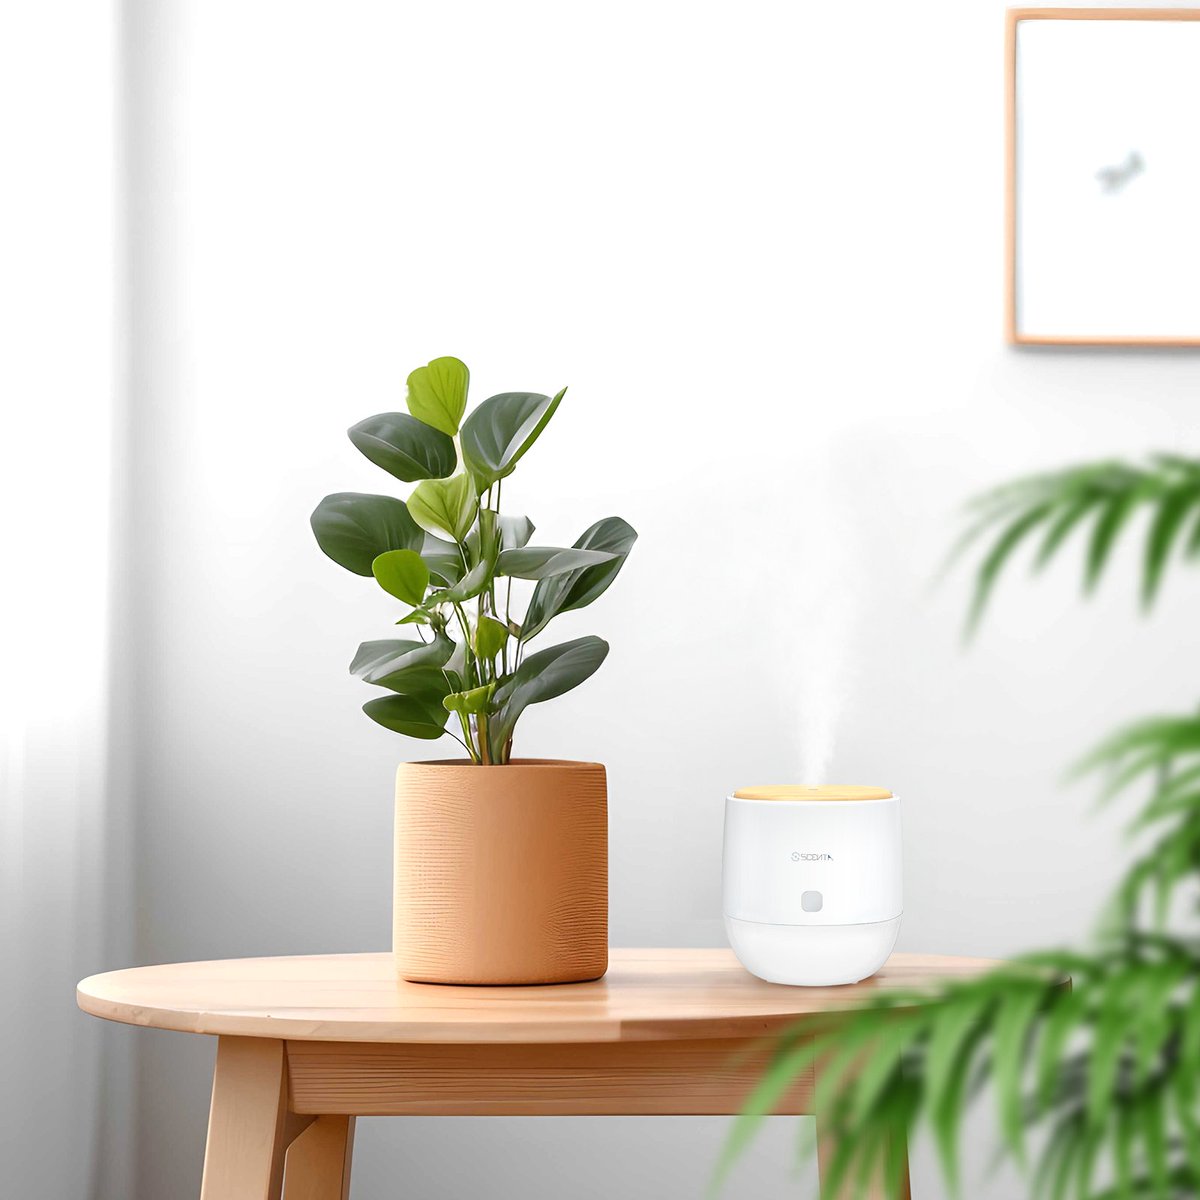 🏡🏡Feature your stylish interior decor
with the LED Aromatherapy Diffuser,
Change the air you breathe.

link in bio

#essentialoildiffuser #diffusers #aromatherapyproducts #homescent
#aromadiffuser #waterlessdiffuser
#portablediffuser #airfreshener #aromamagic